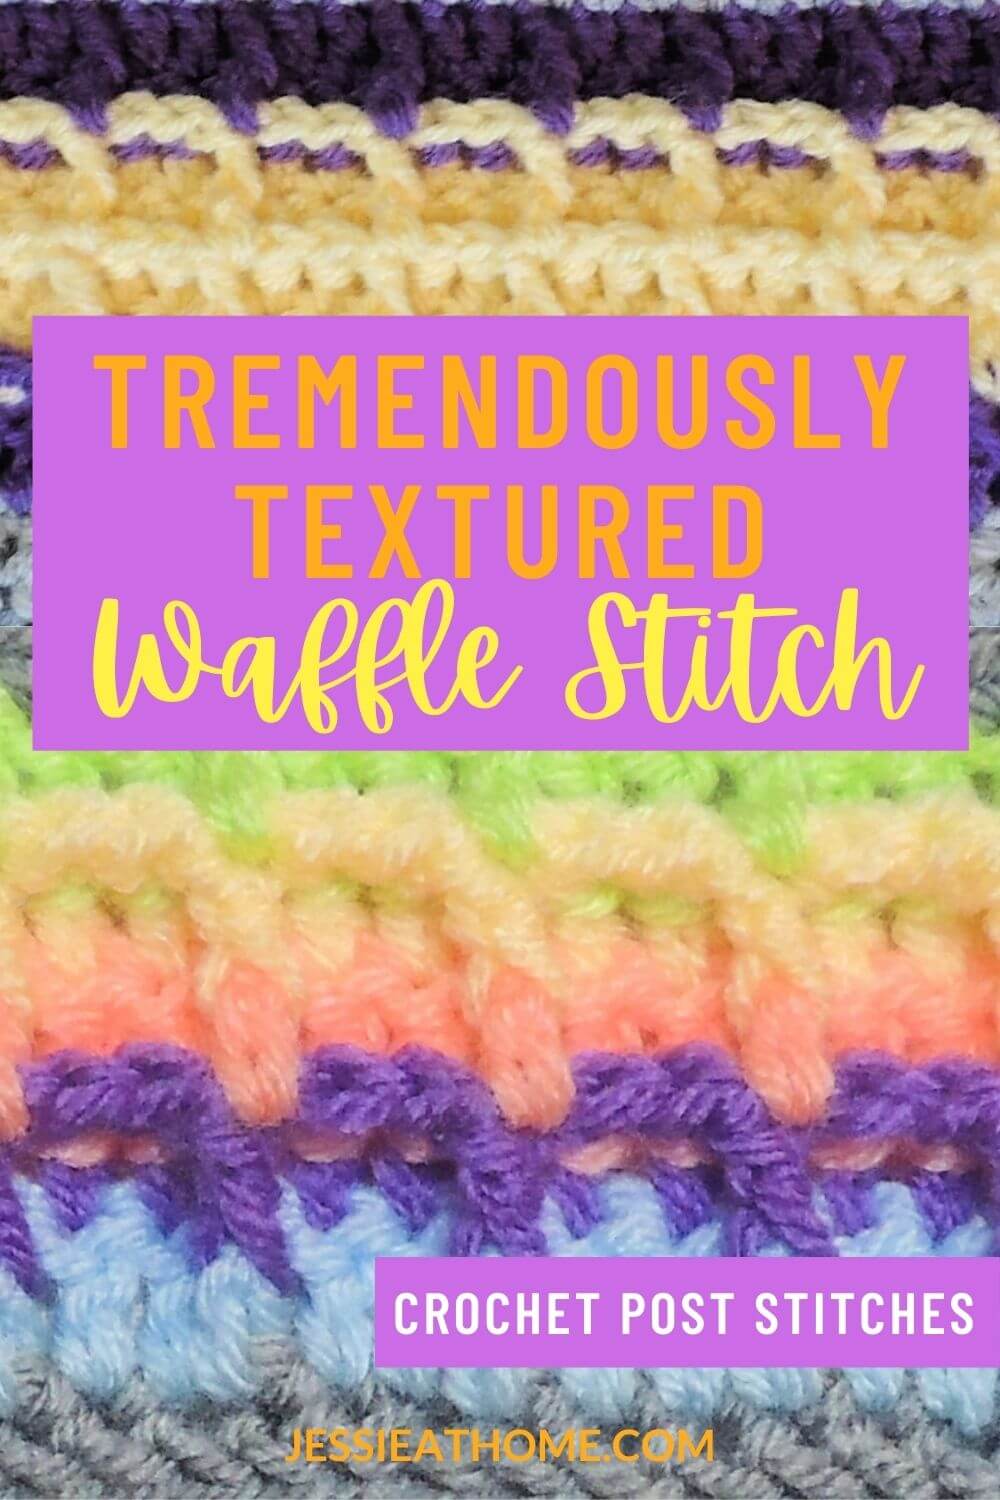 Learn To Crochet the Unique, Textured Waffle Stitch